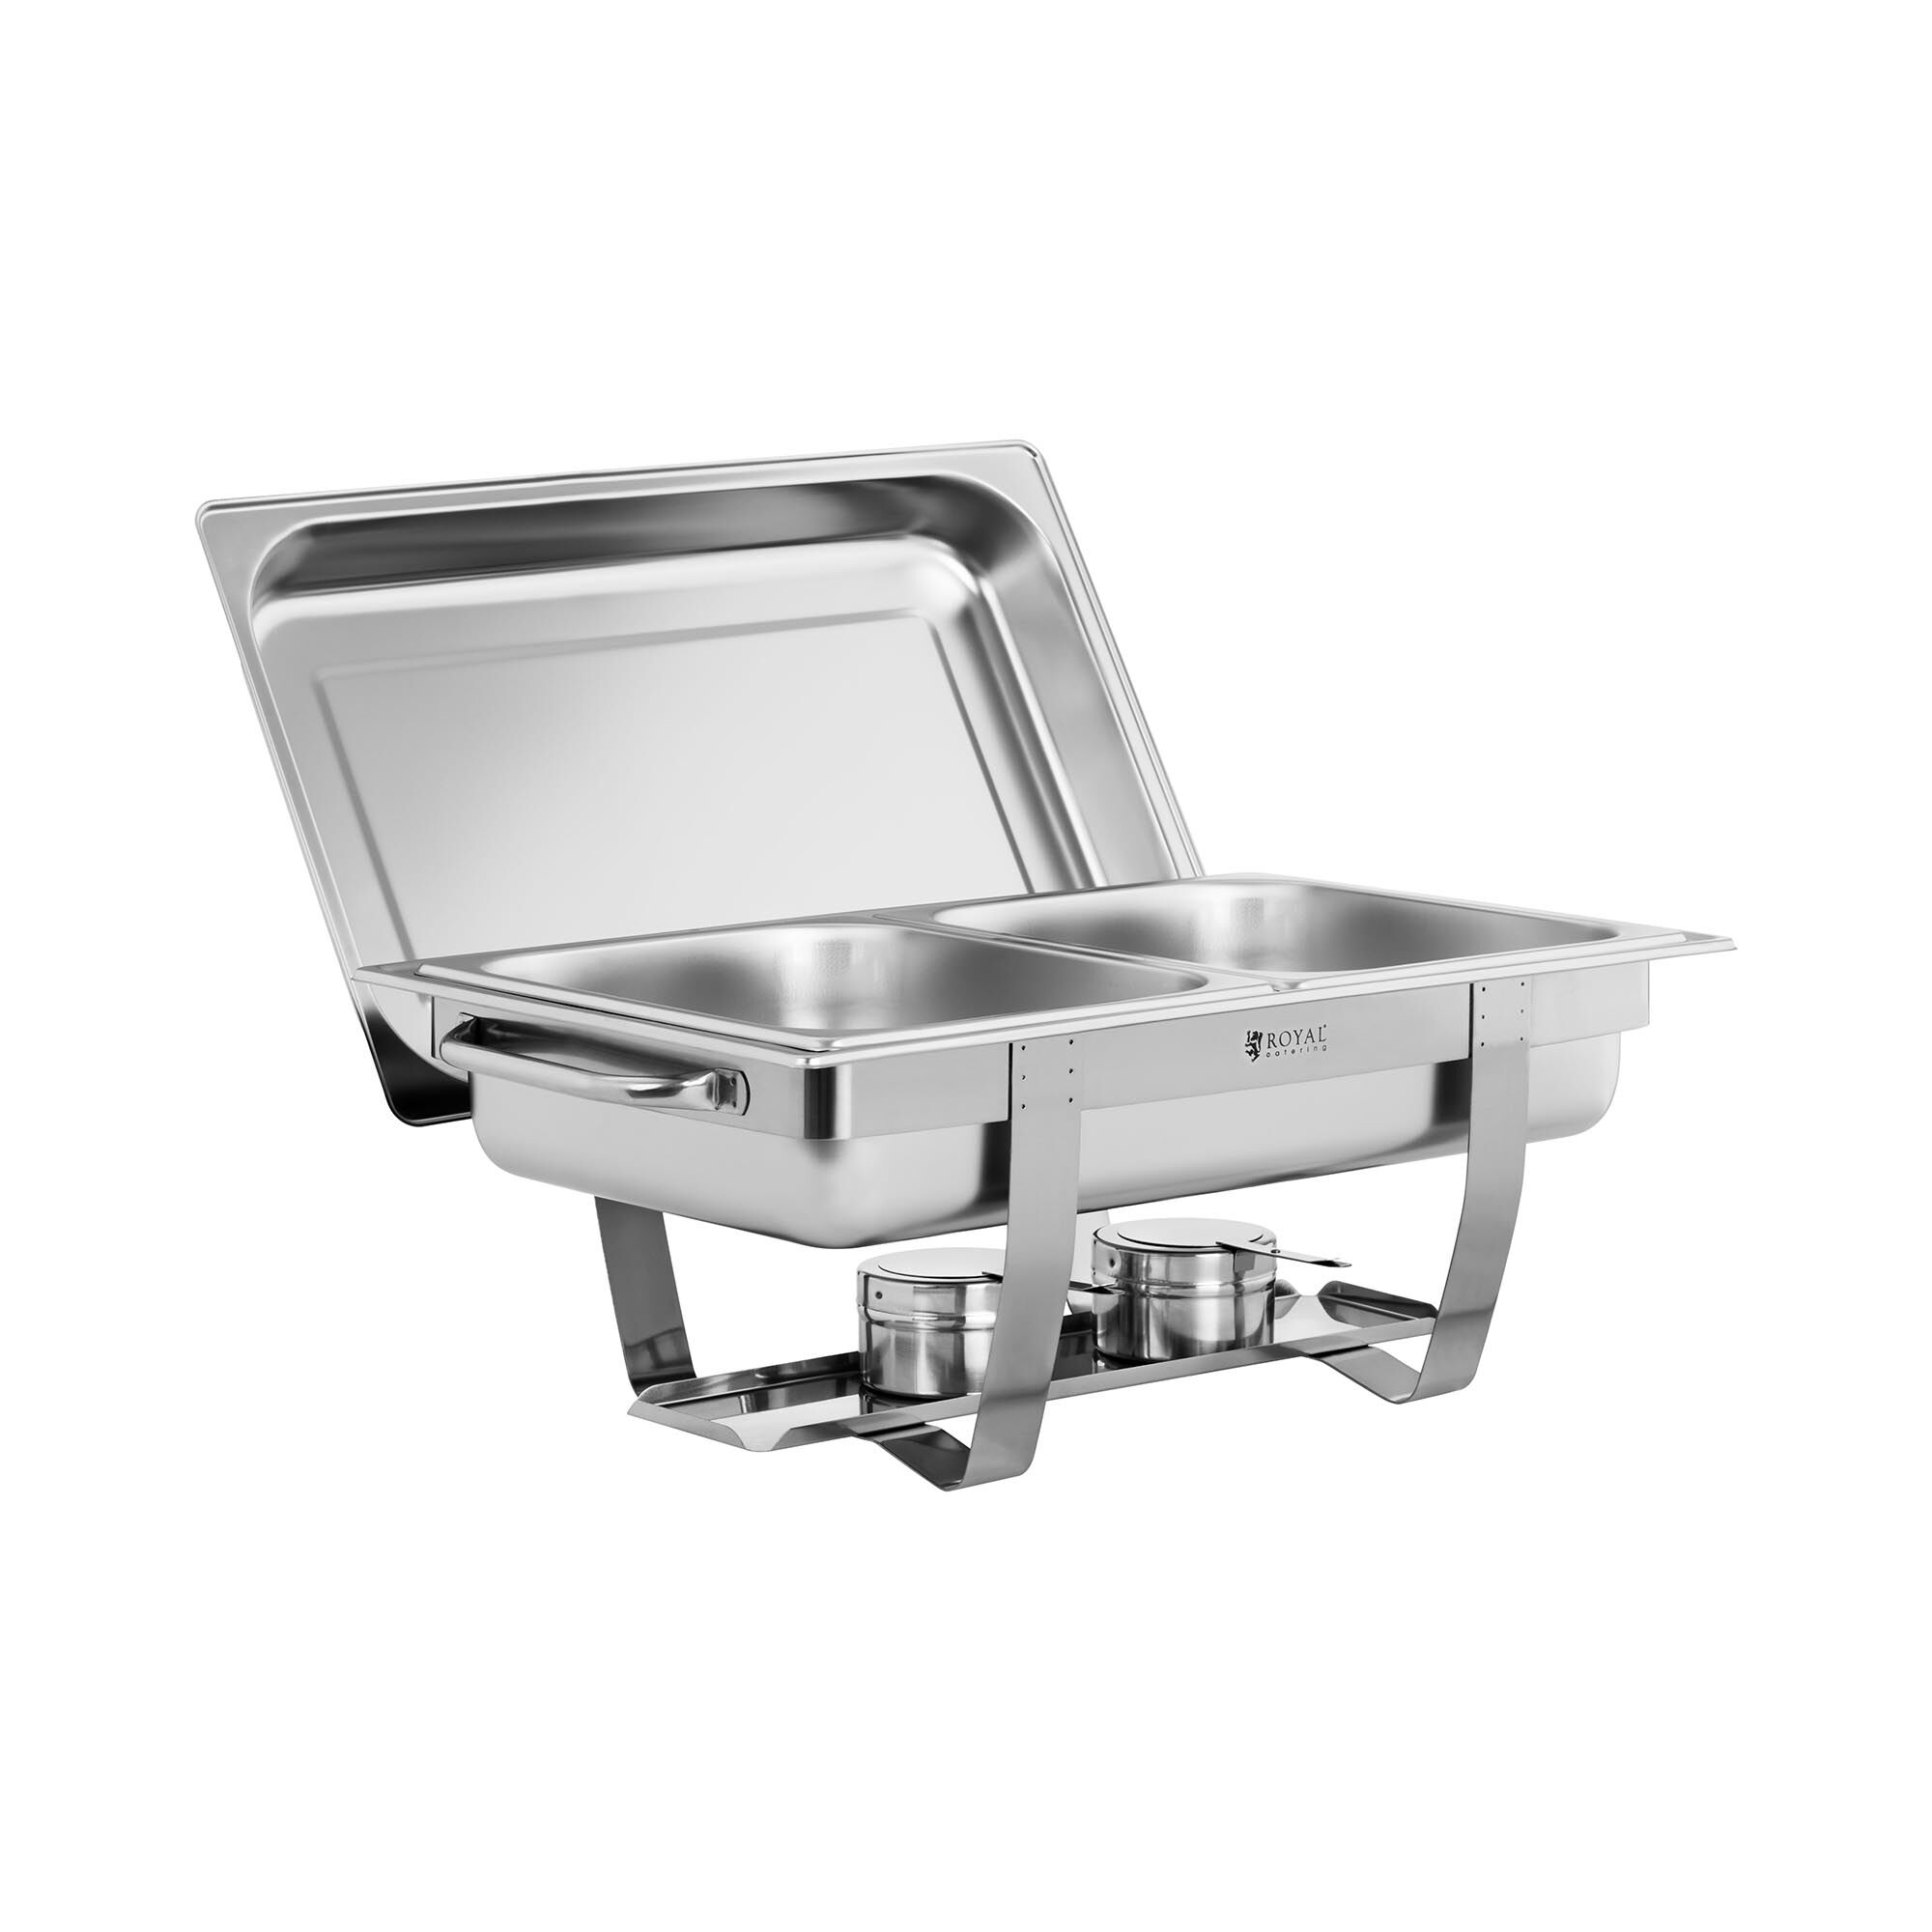 Royal Catering Chafing dish - 2 x GN 1/2 - 11 l - inkl. 2 brændere